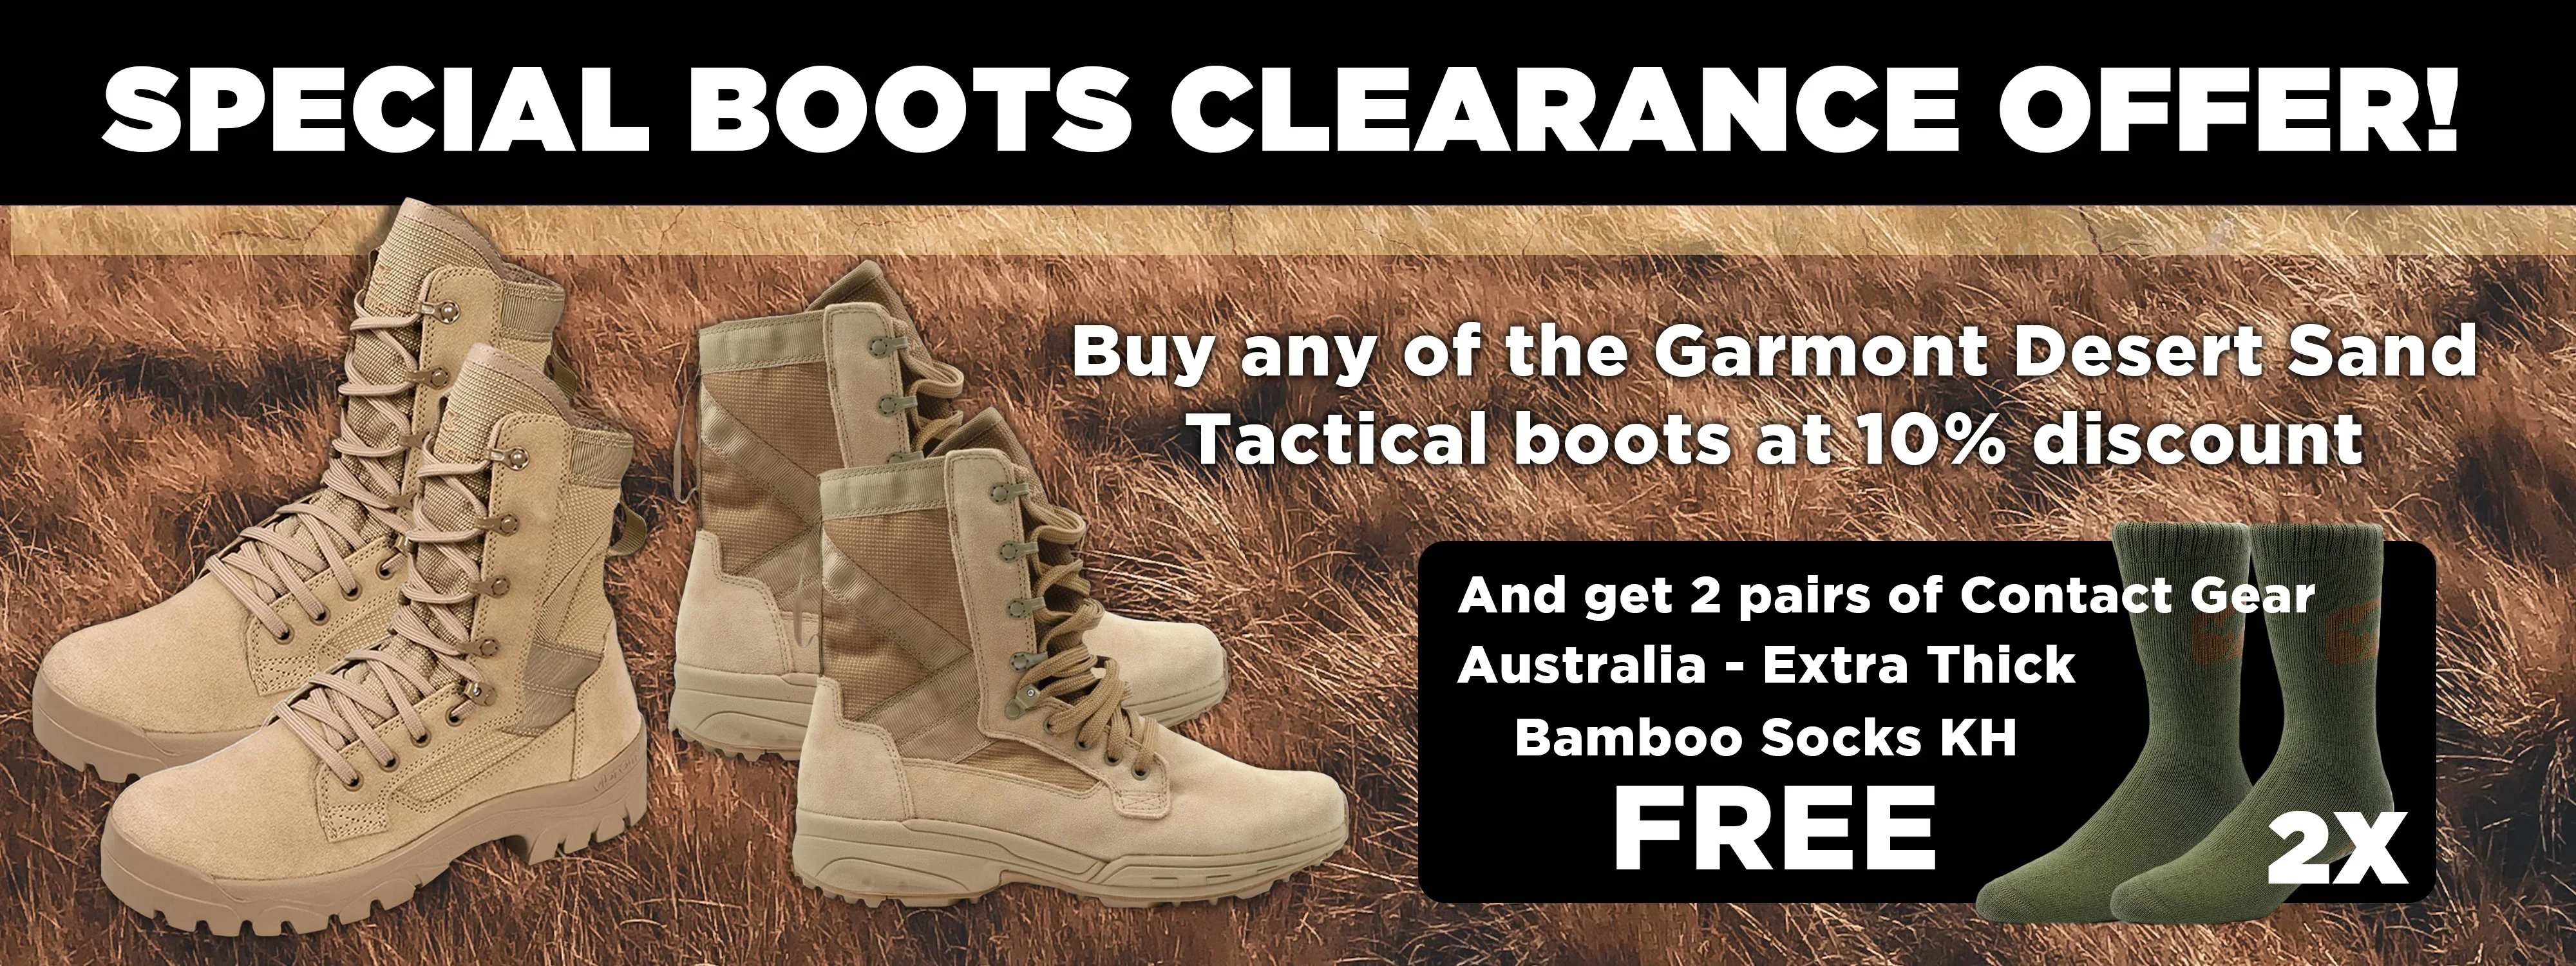 Boot and free socks offer